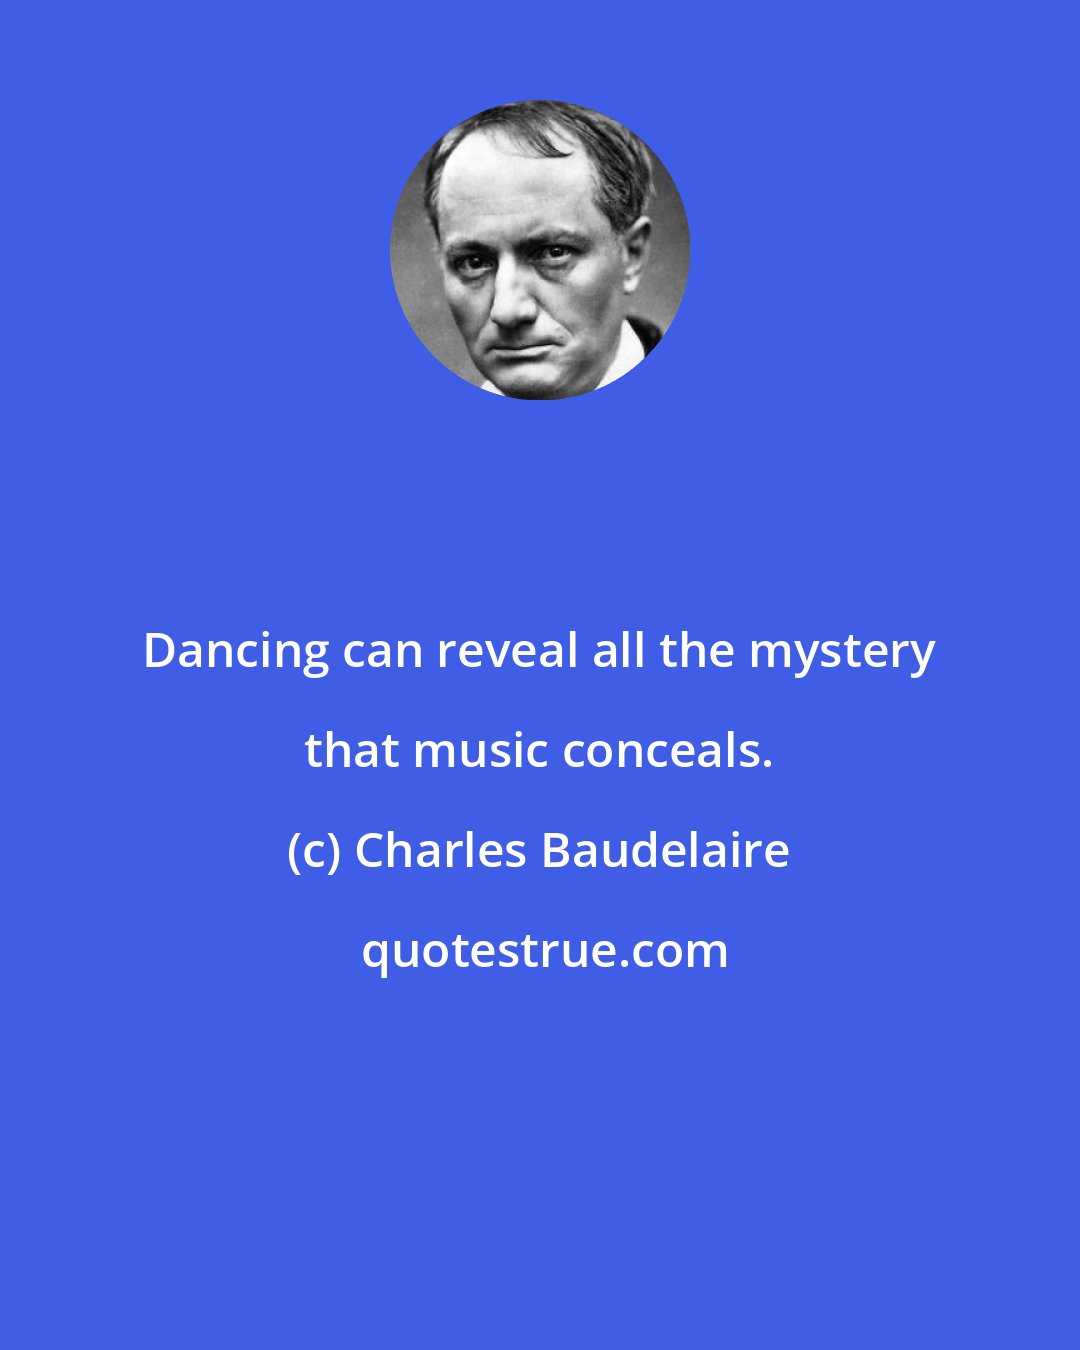 Charles Baudelaire: Dancing can reveal all the mystery that music conceals.